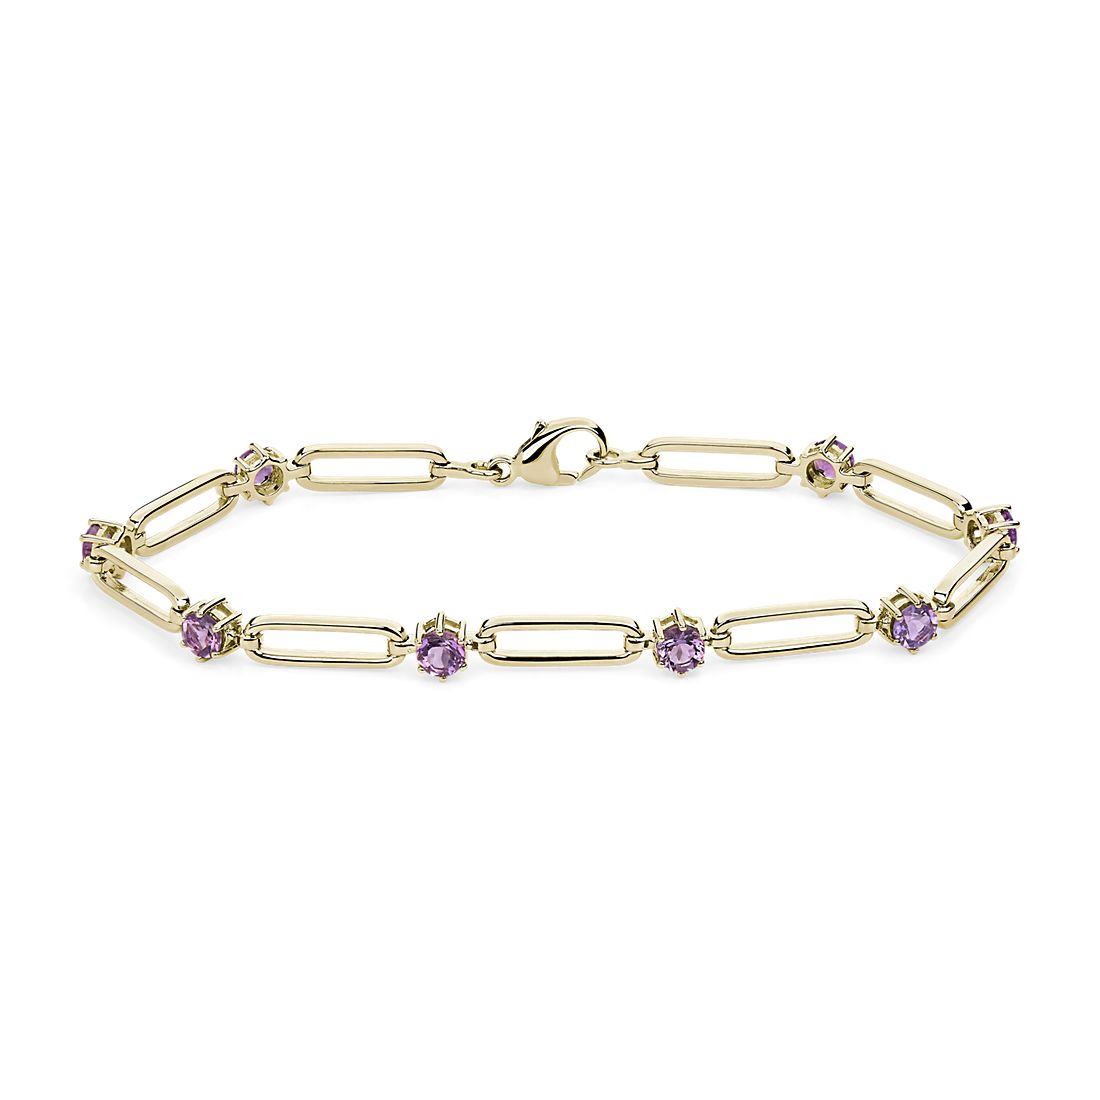 Round Amethyst Paperclip Bracelet in 14k Yellow Gold